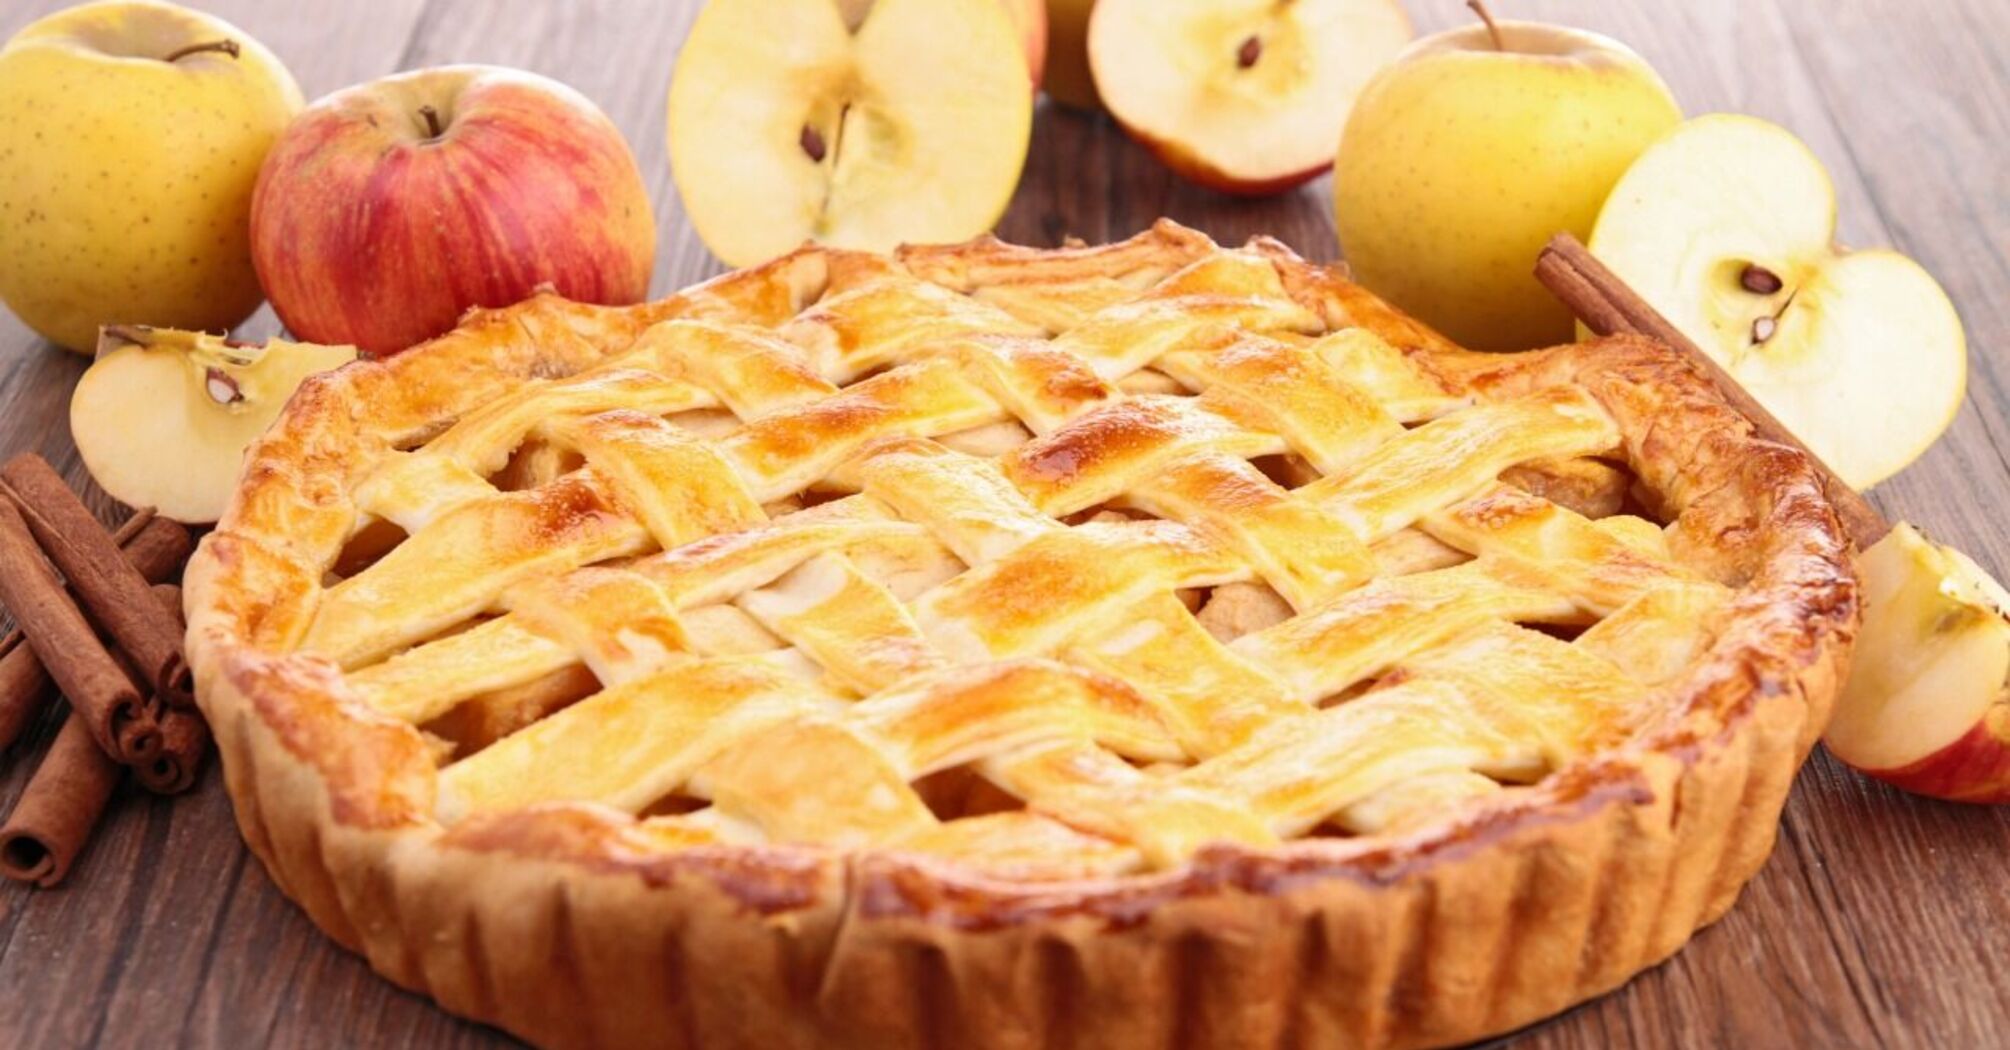 How to make an apple pie for Lent 